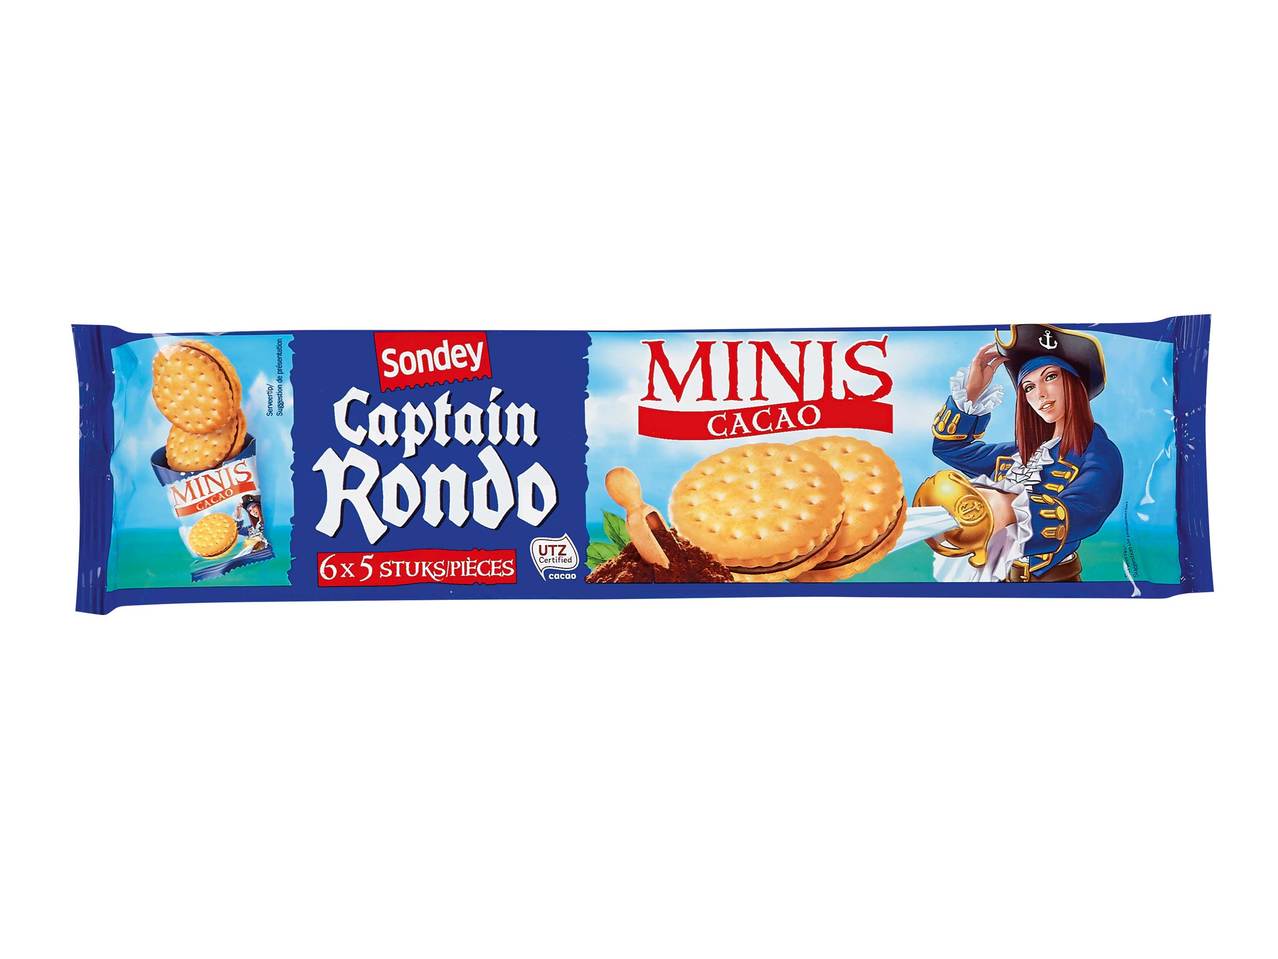 Minibiscuits